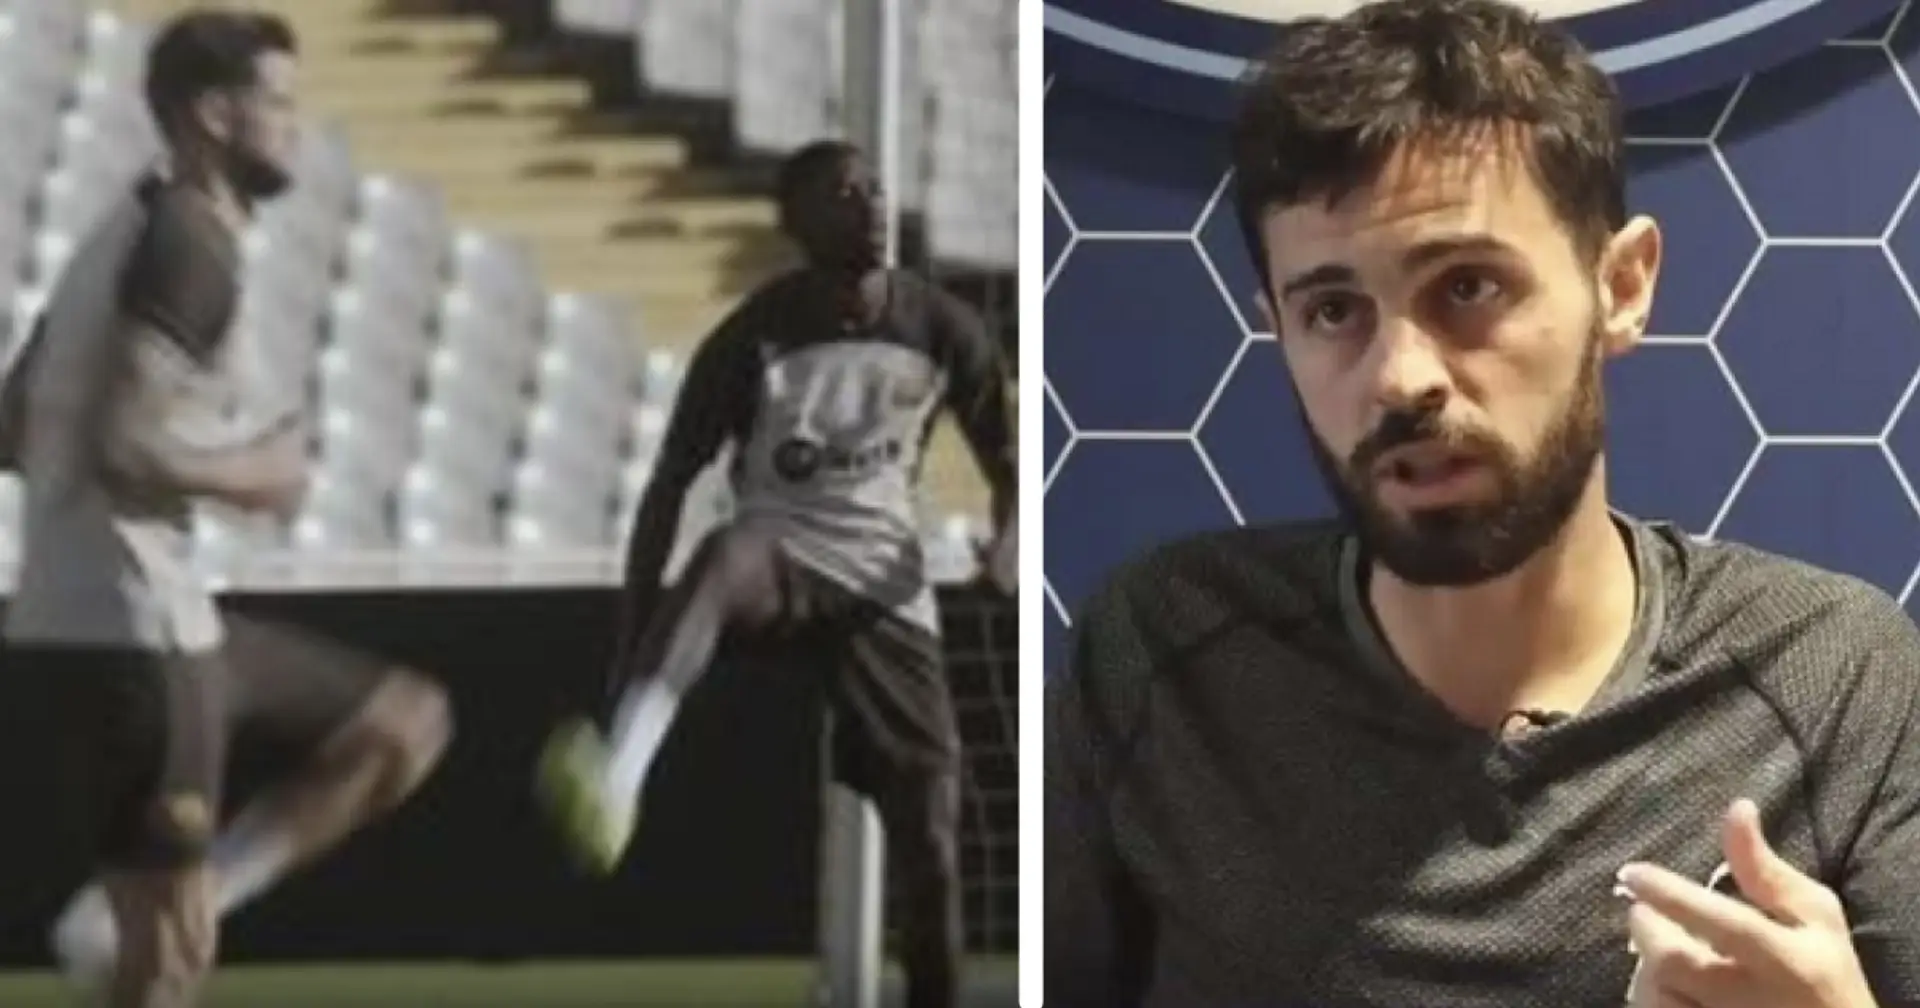 Dembele insulted while arriving for training and 3 more under-radar stories of the day